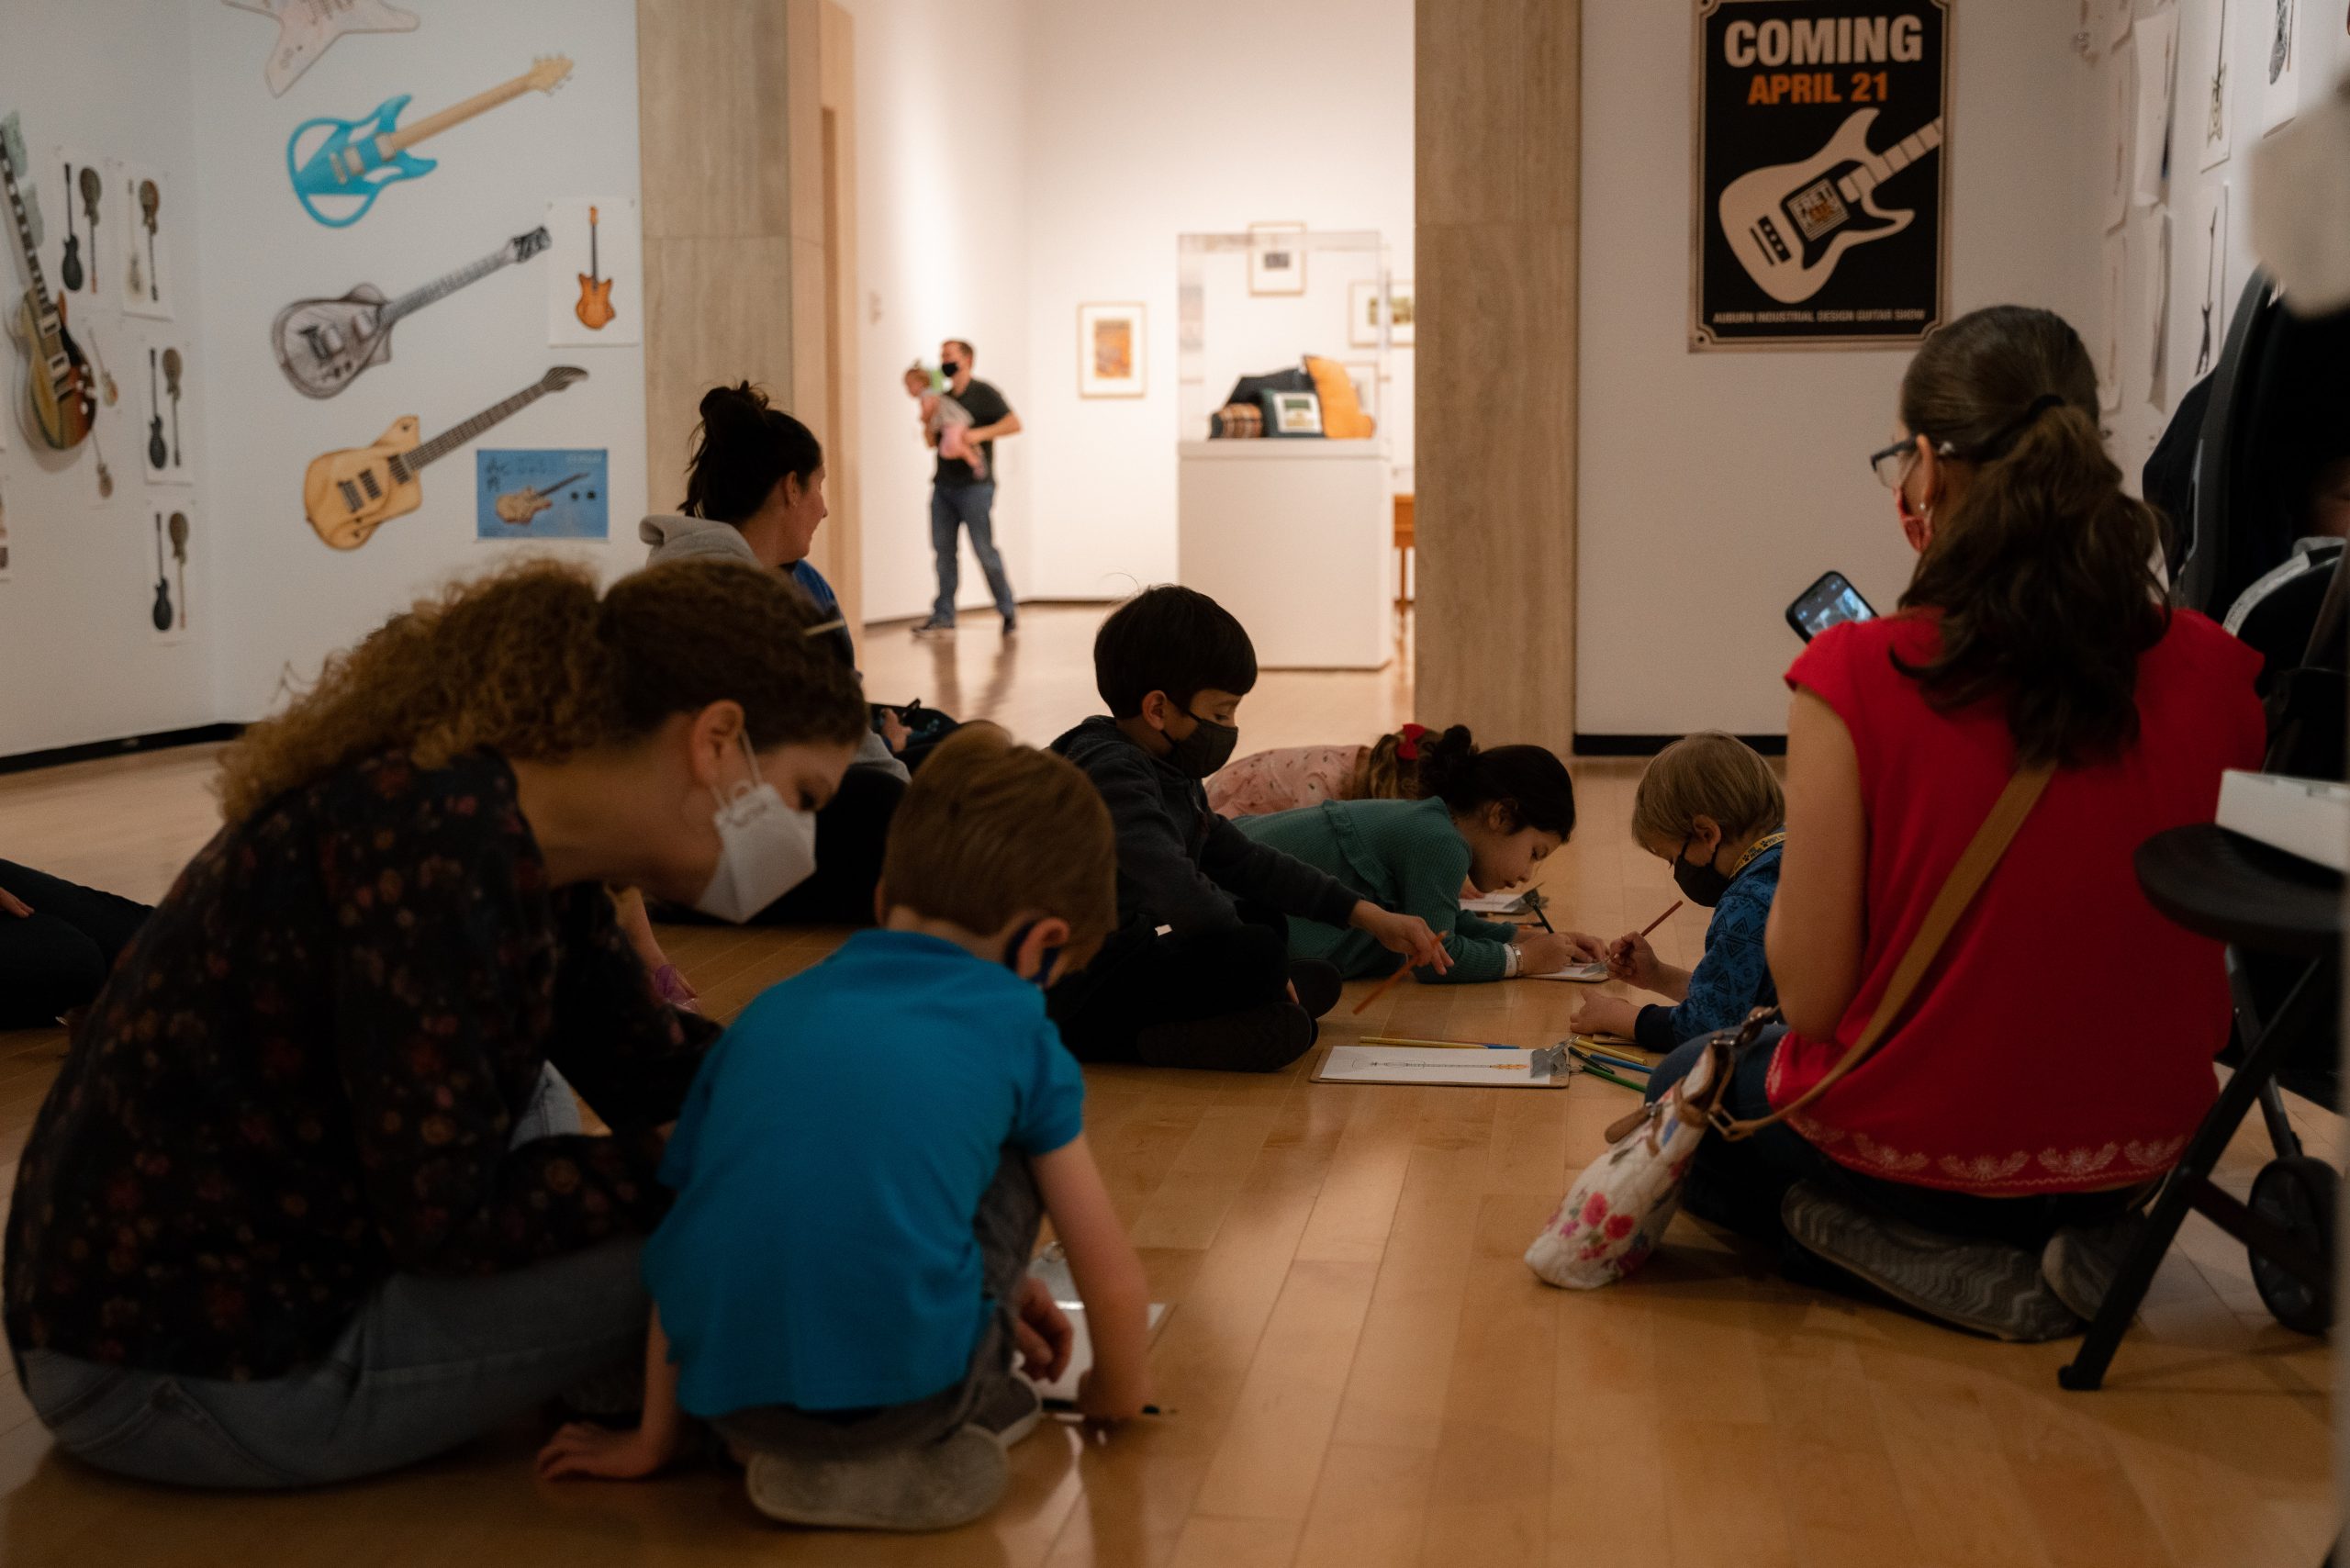 A group of children with their parents sit on the floor of a gallery while coloring on paper.